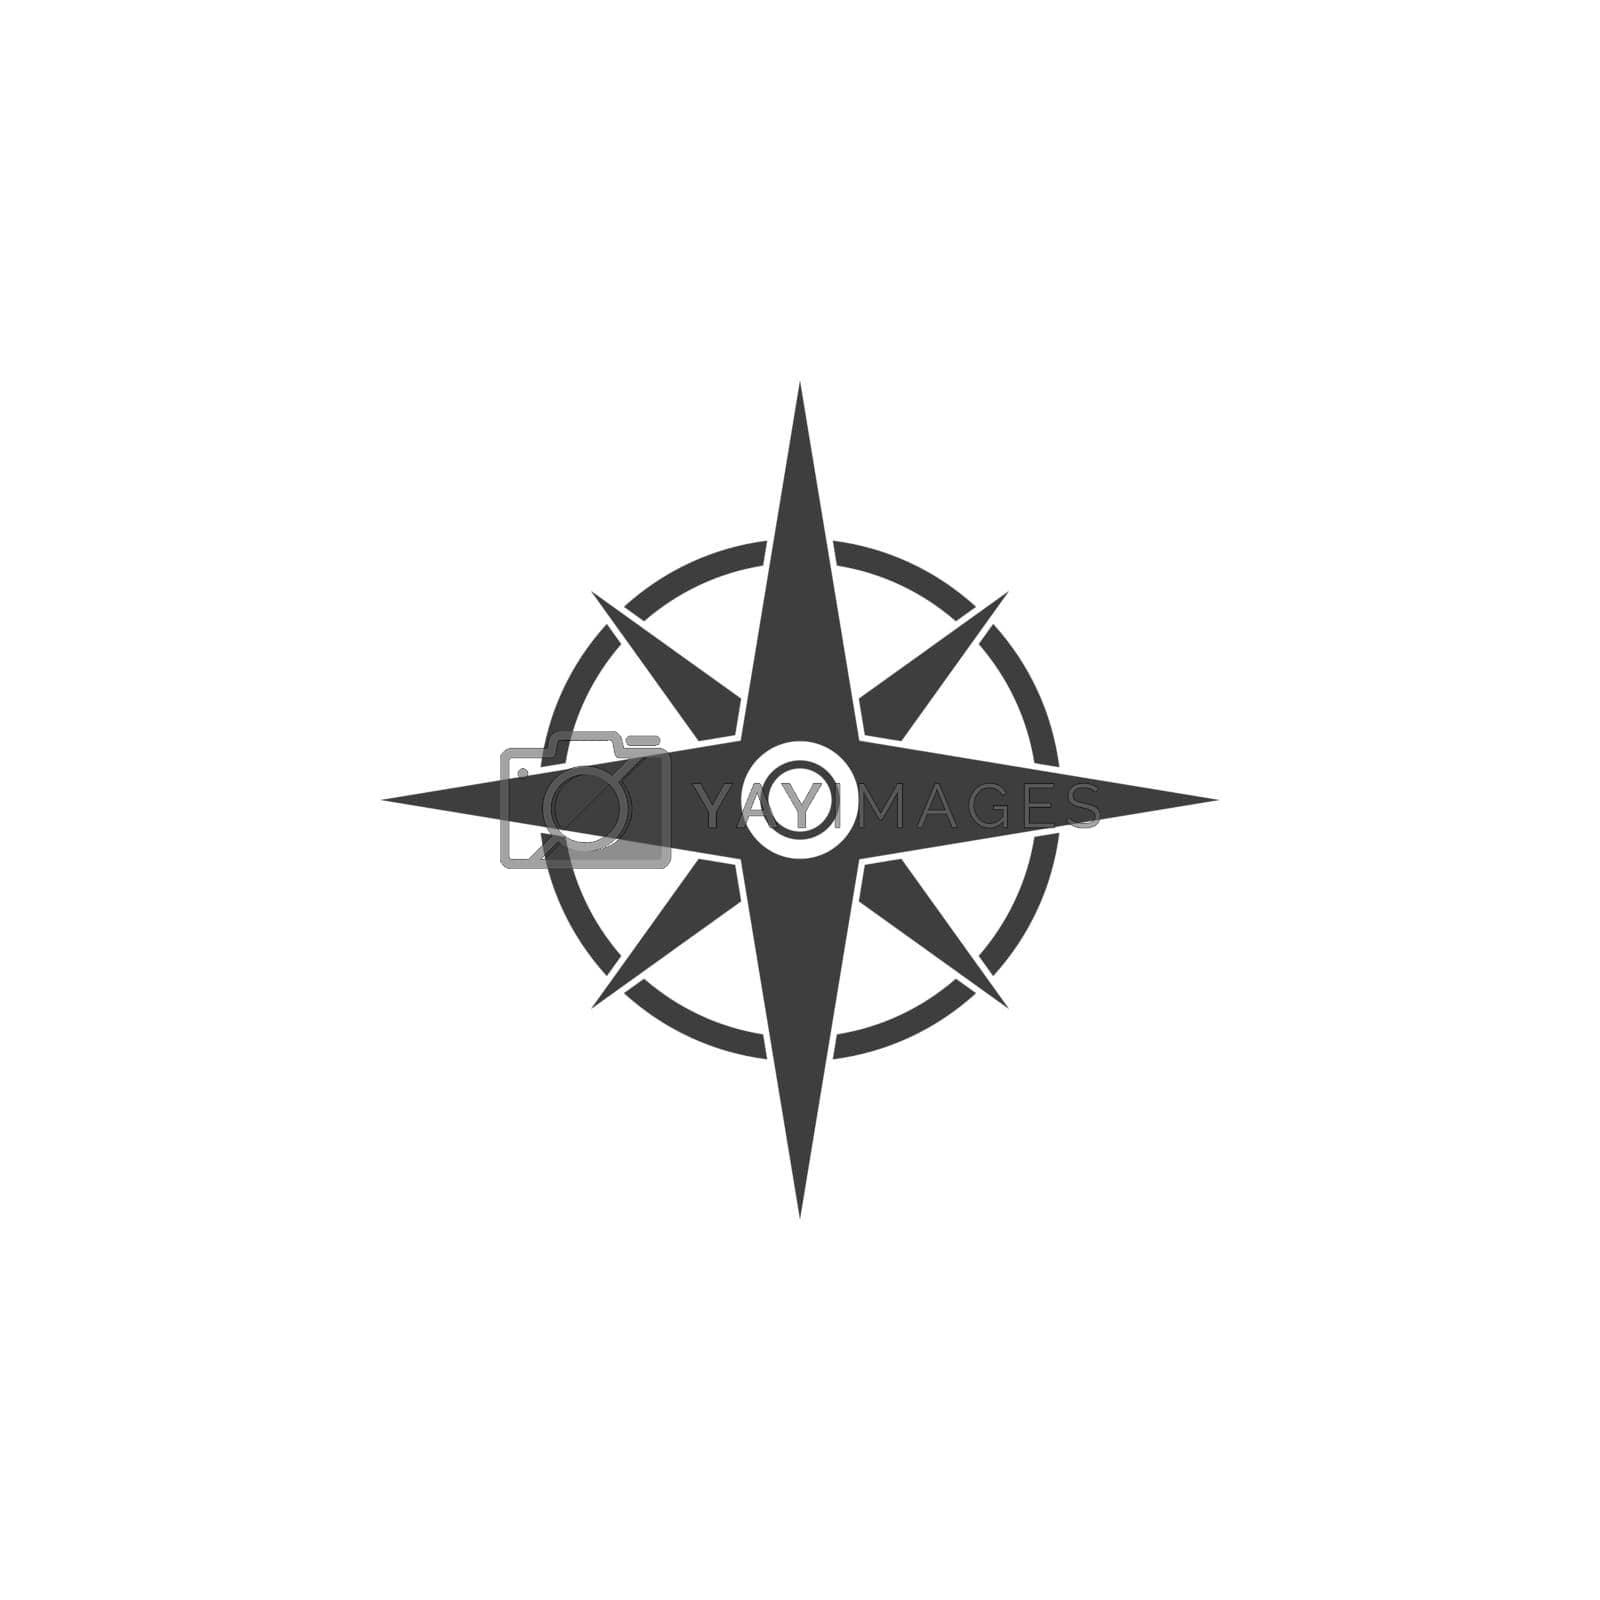 Royalty free image of Vector - Compass signs and symbols by ichadsgn